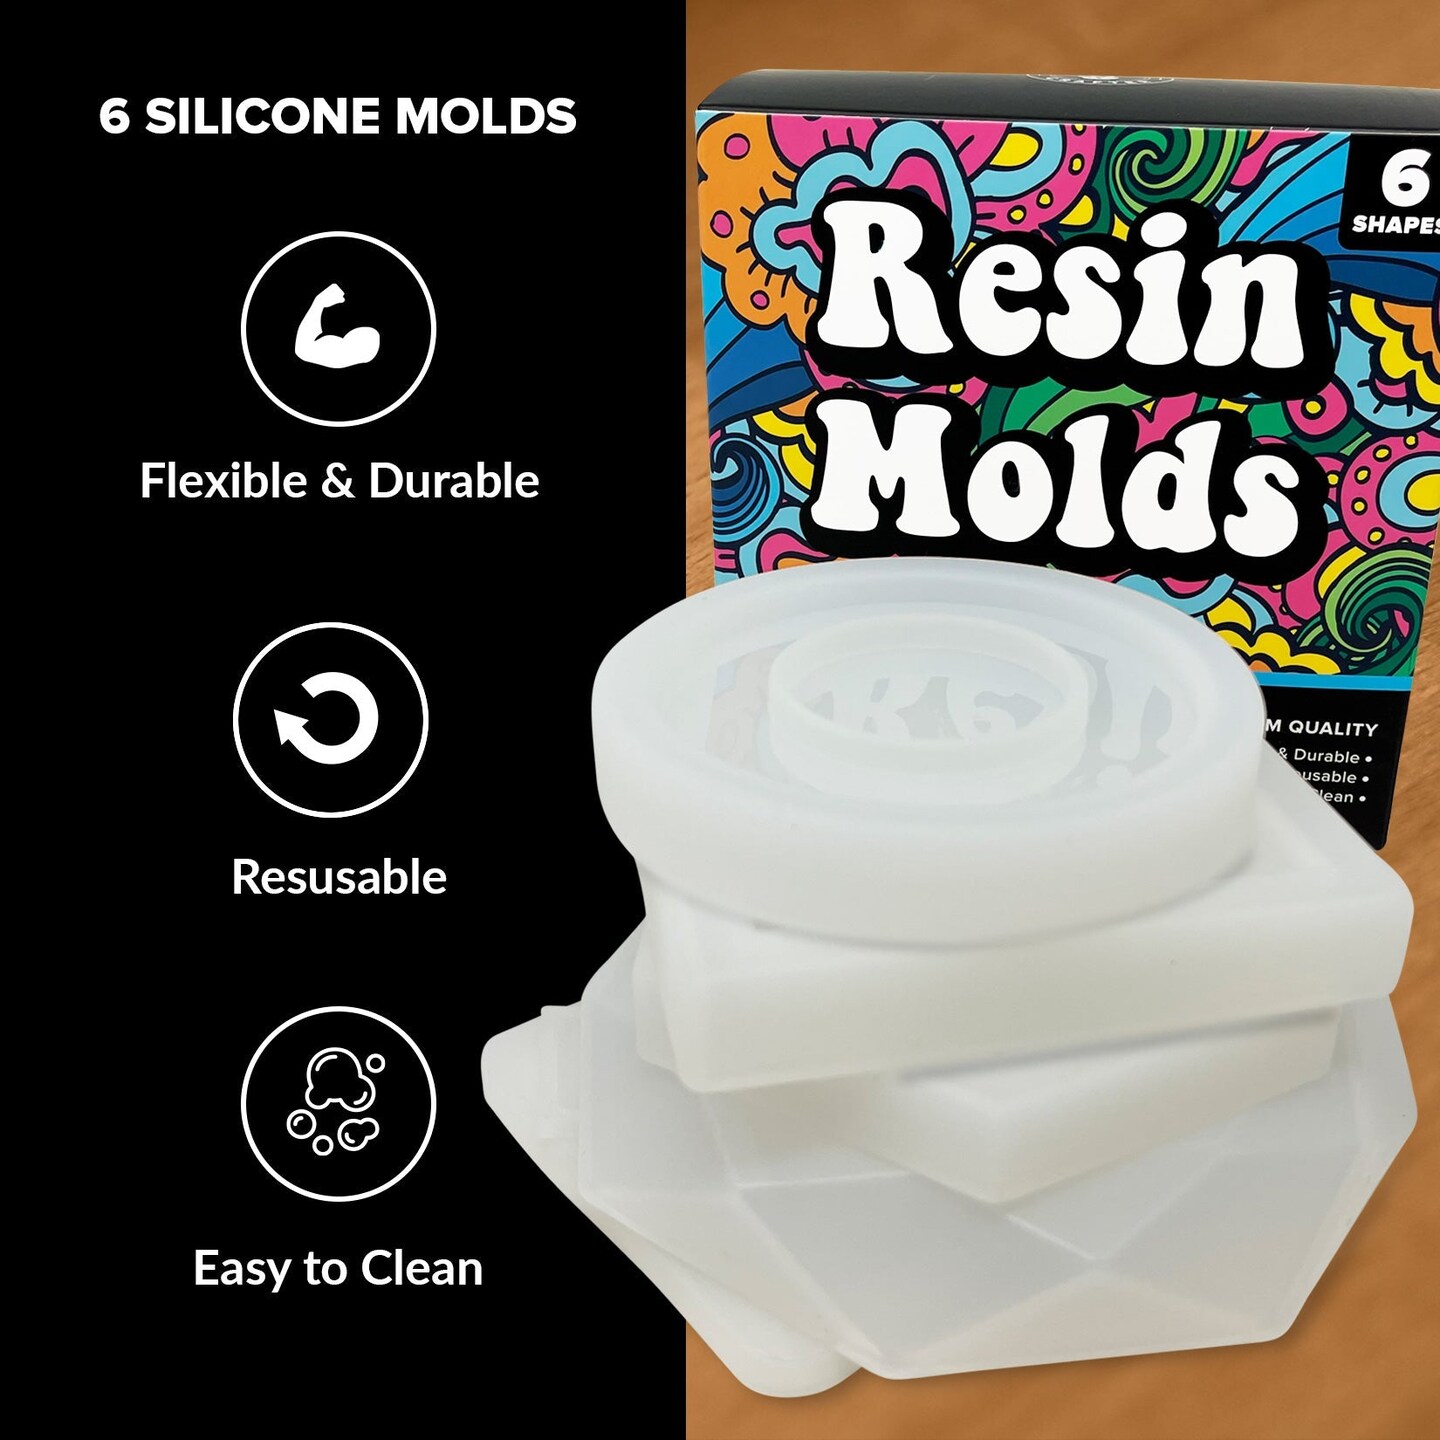 Silicone Resin Molds for Epoxy Resin Molds Silicone Kit Bundle Jewelry, Pendants, Trinket Tray, Ashtray, Coasters for UV Resin Casting Expoxy Resin Molds Kit Bundle Complete Set for Resin Art